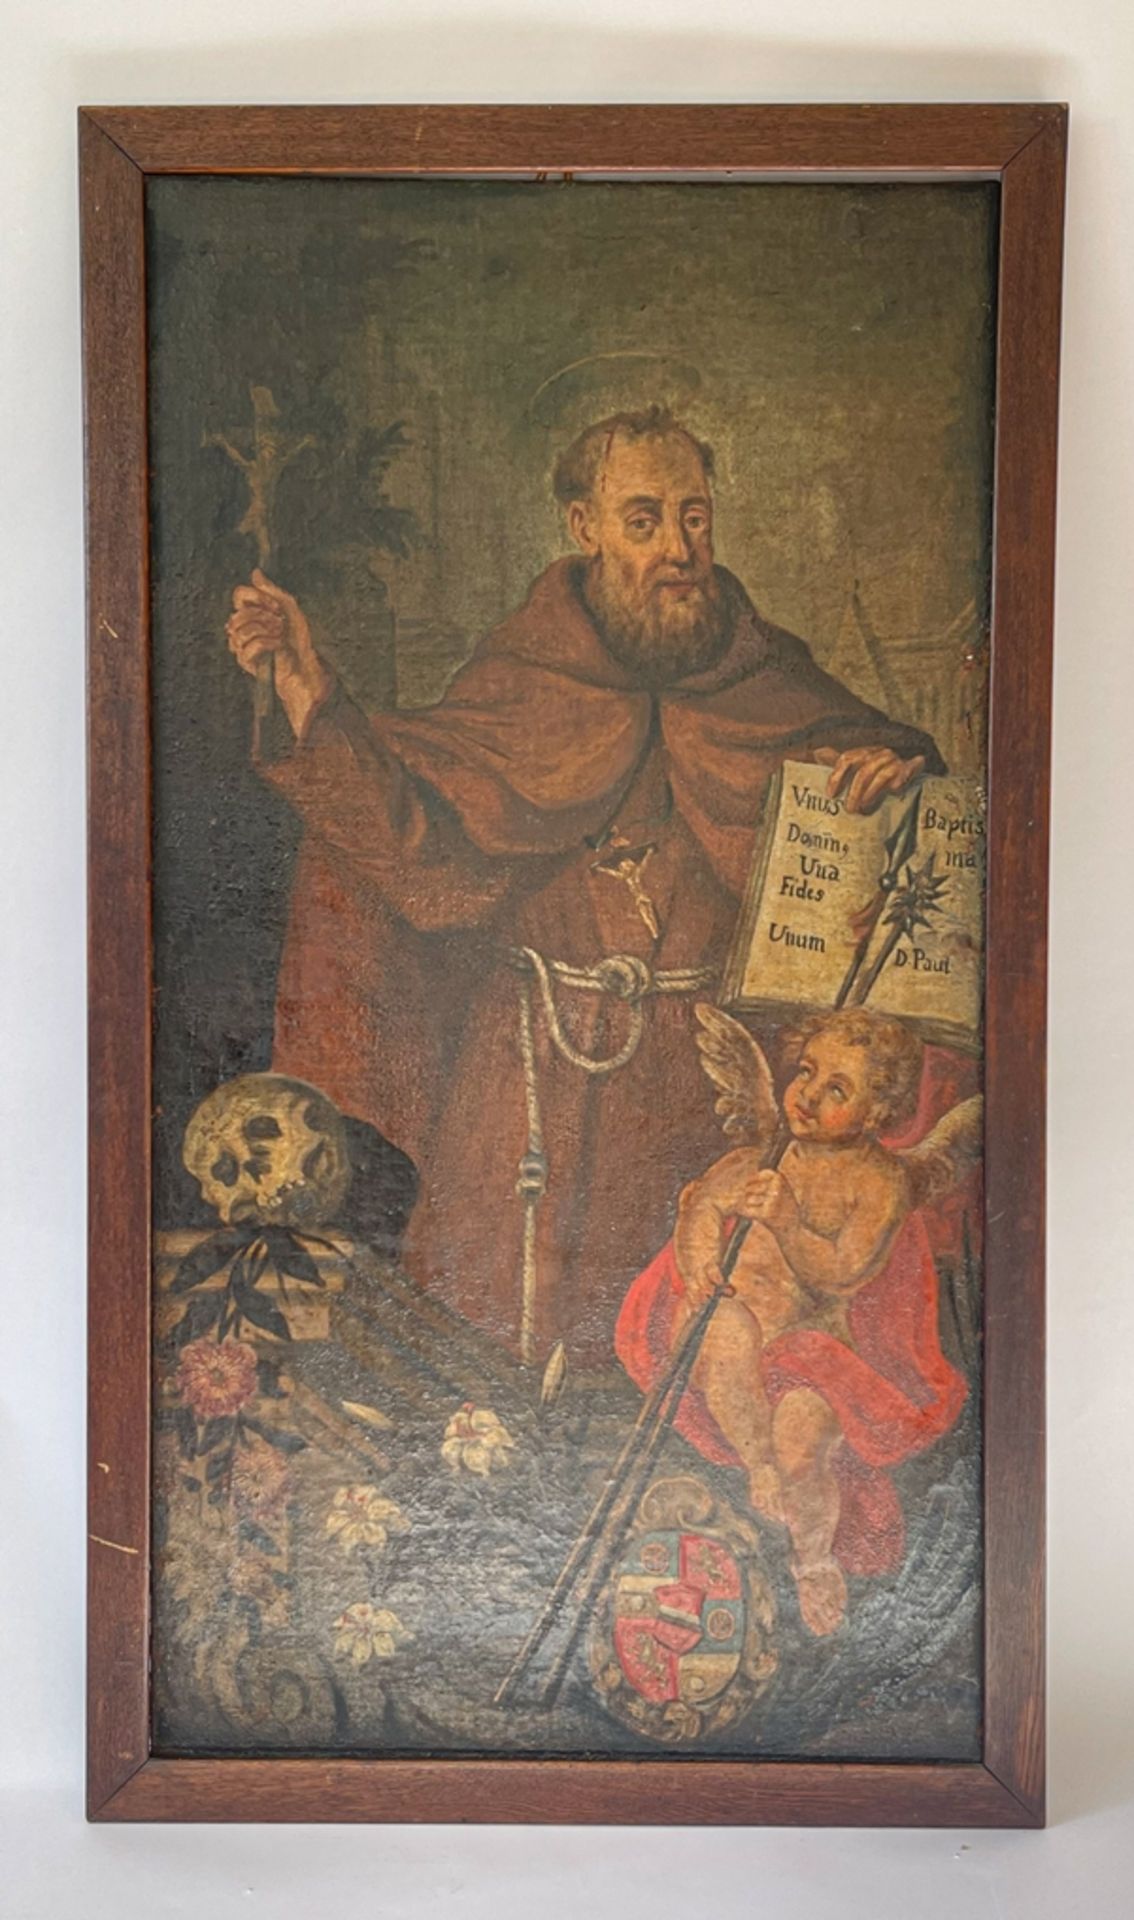 Baroque painting monk with crest/skull